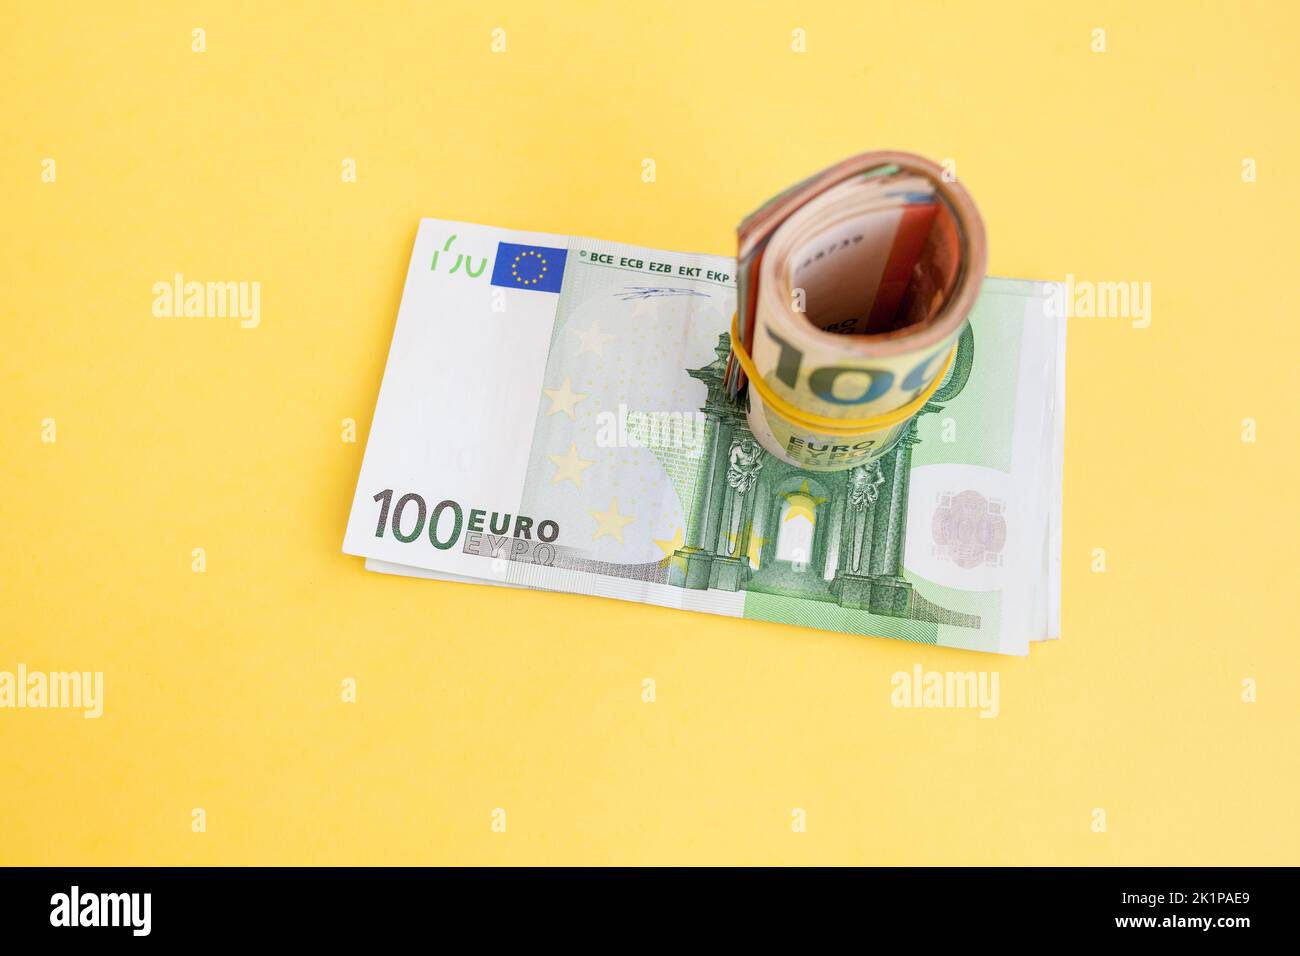 Money roll euro banknotes with yellow rubber band on yellow background Stock Photo